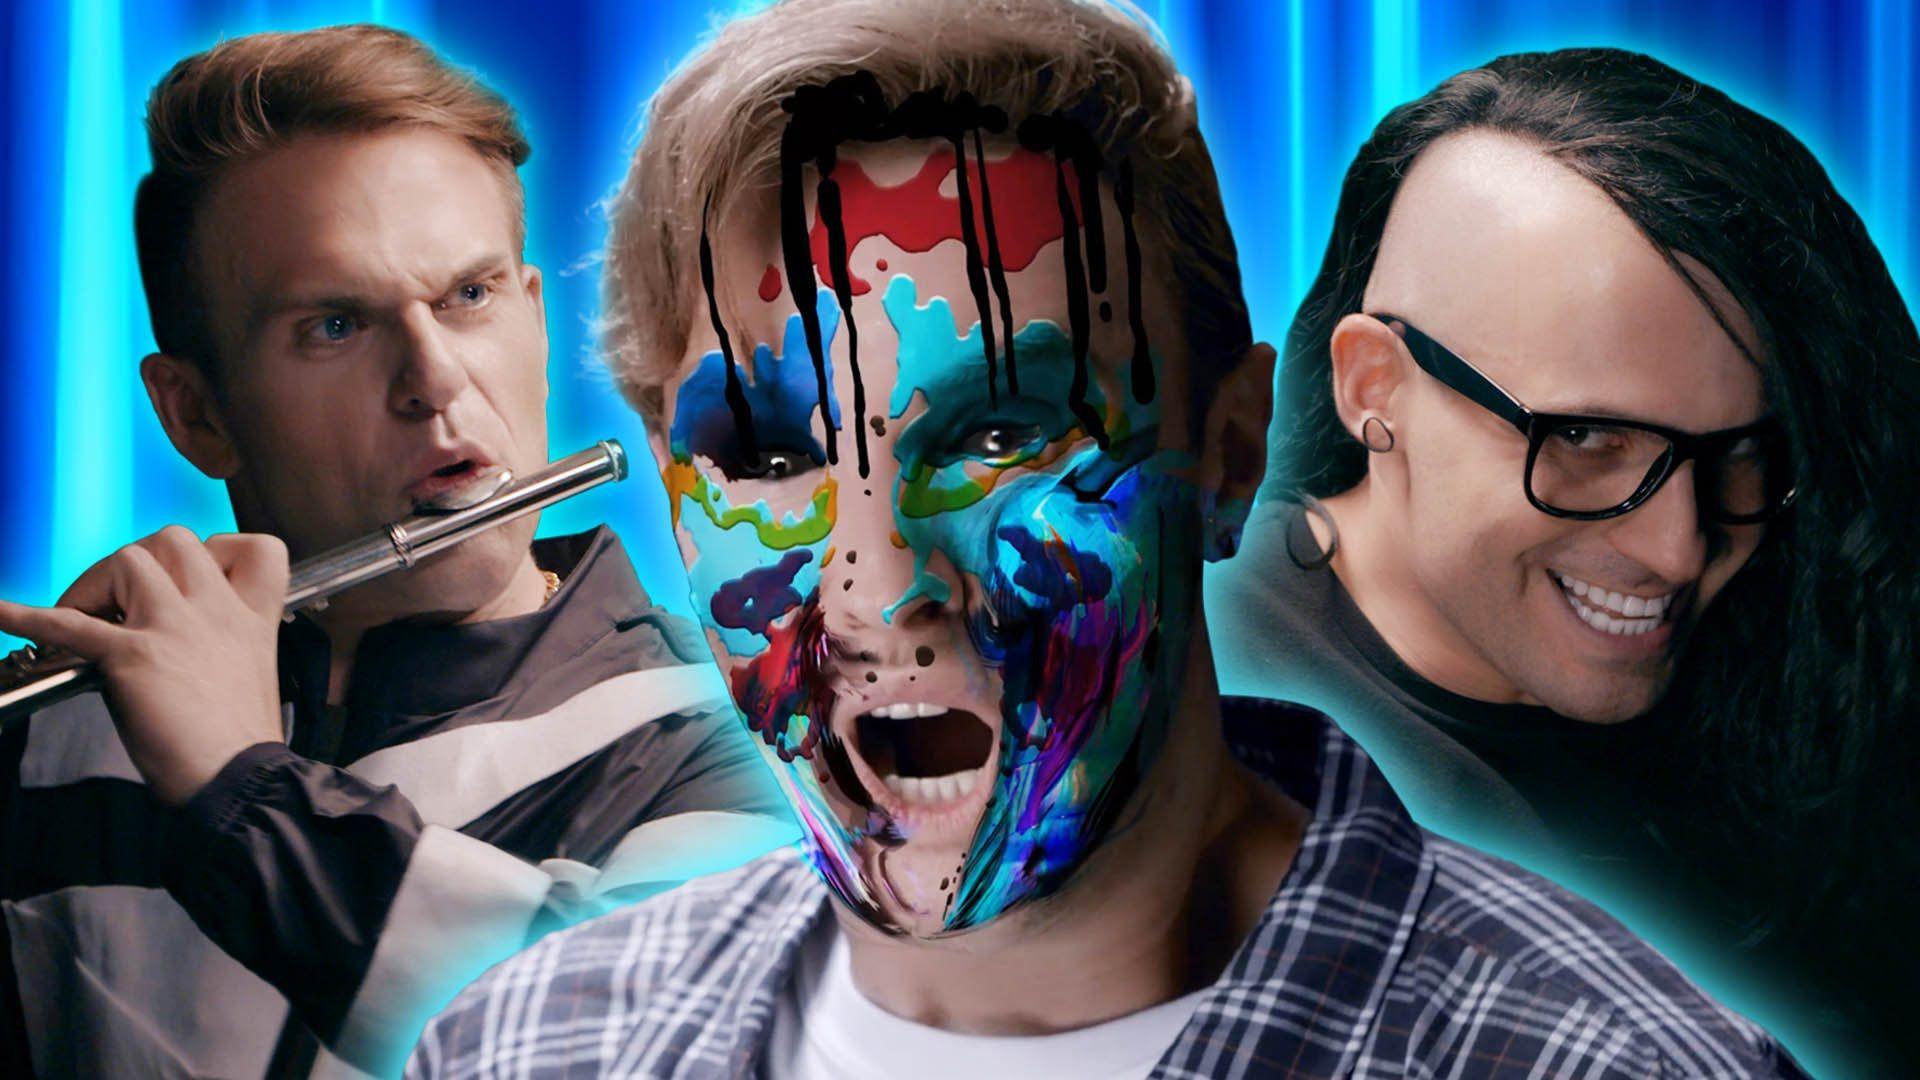 Skrillex and Diplo Are You Now with Justin Bieber PARODY